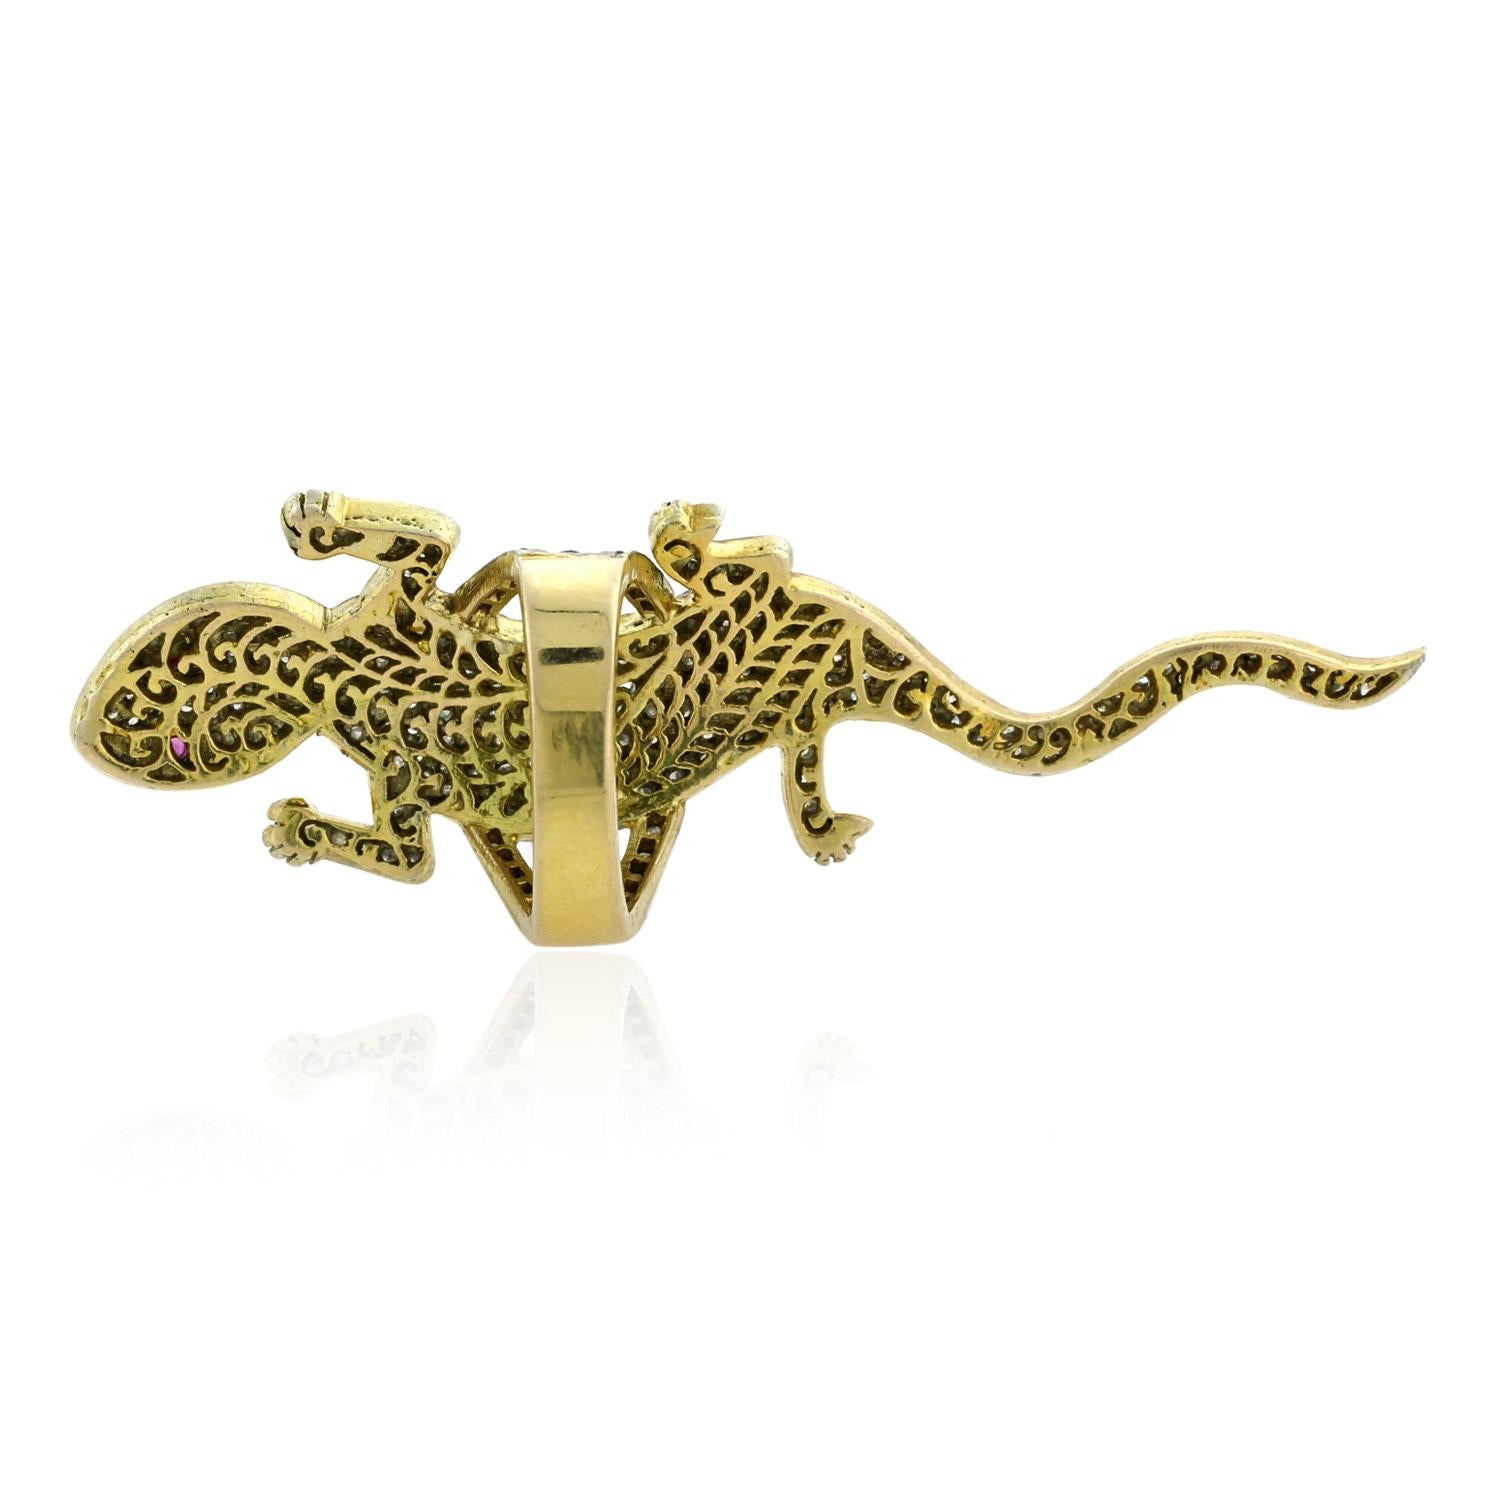 Art Deco Lizard Shaped Pave Diamond Ring With Ruby Eyes Made In 14k Yellow Gold & Silver For Sale